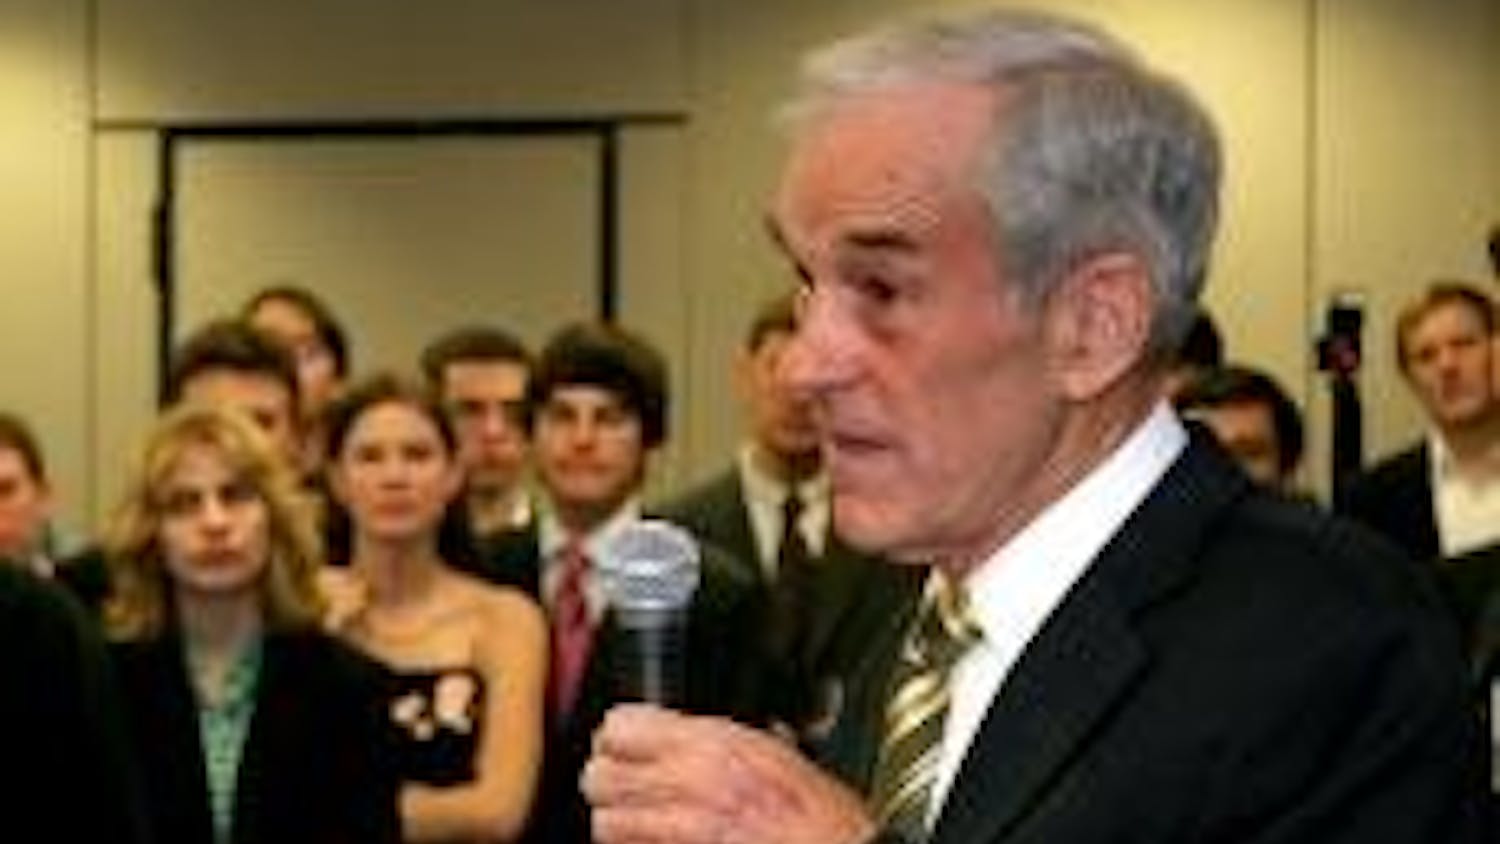 RAISING FUNDS - Rep. Ron Paul, R-Texas, speaks Wednesday night at a College Republicans' fundraiser. The Republican presidential hopeful raised many issues, including legalizing medicinal marijuana.